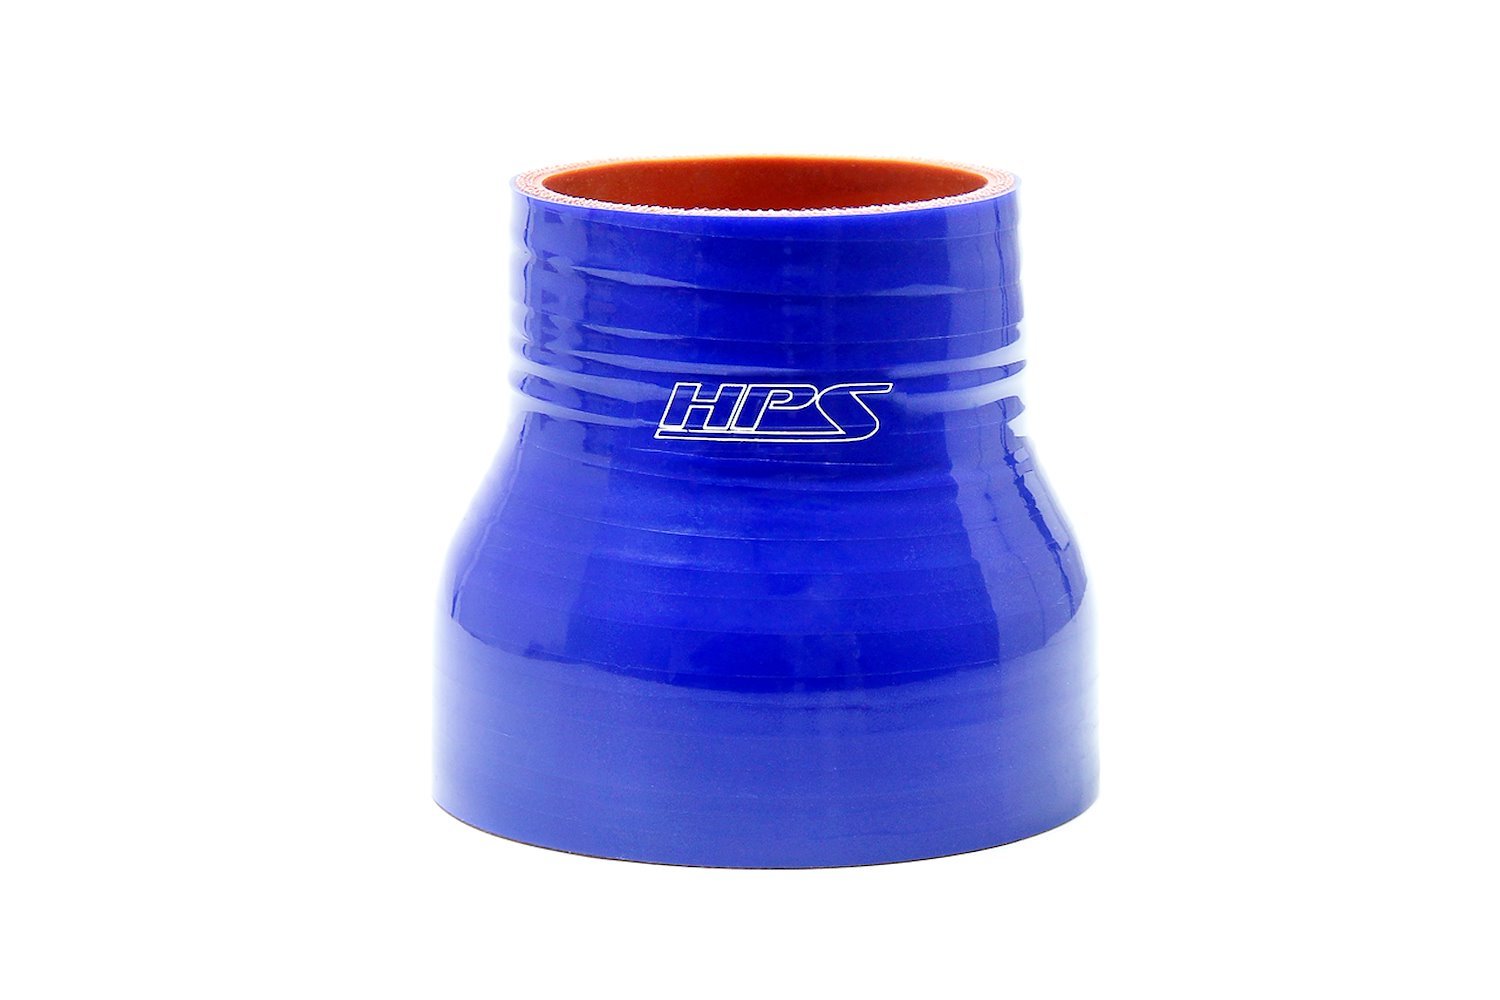 HTSR-300-400-L6-BLUE Silicone Reducer Hose, High-Temp 4-Ply Reinforced, 3 in. - 4 in. ID, 6 in. Long, Blue